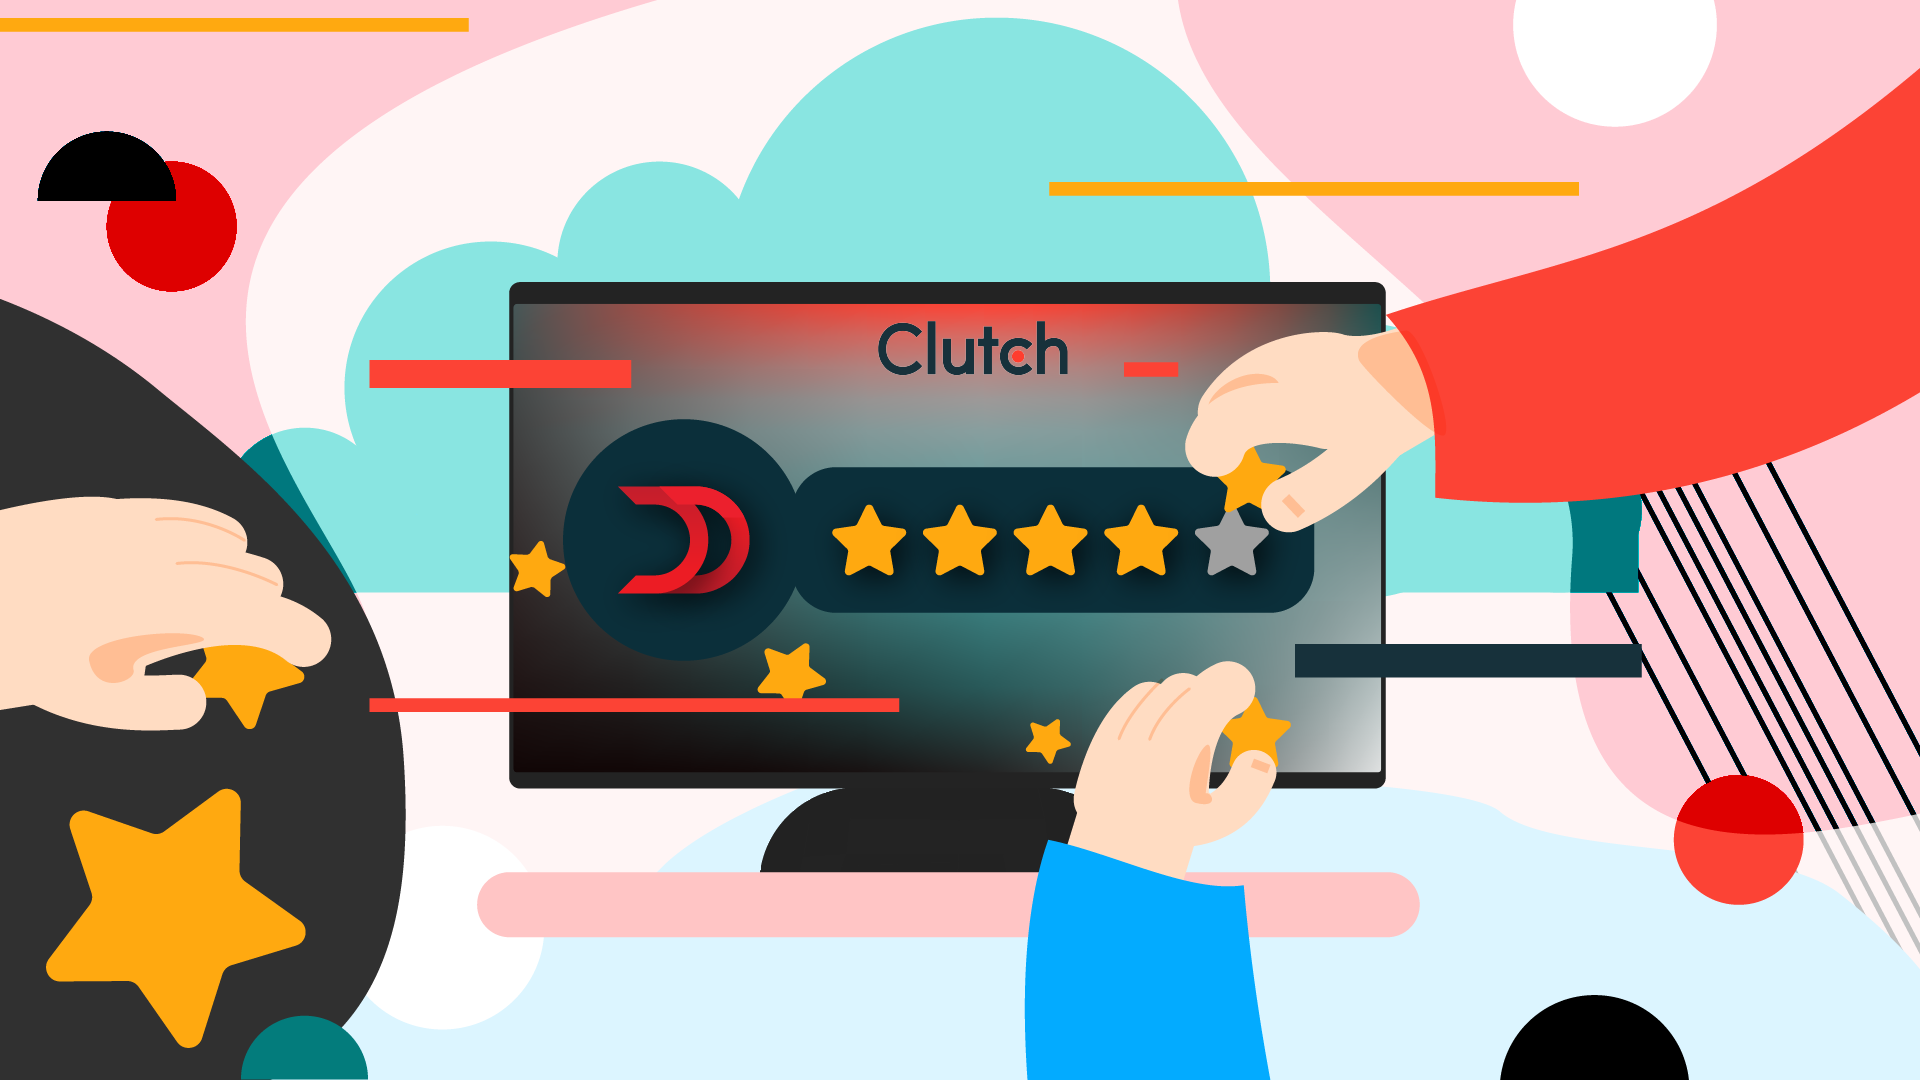 addevice-earns-another-5-star-review-on-clutch-from-satisfied-partner